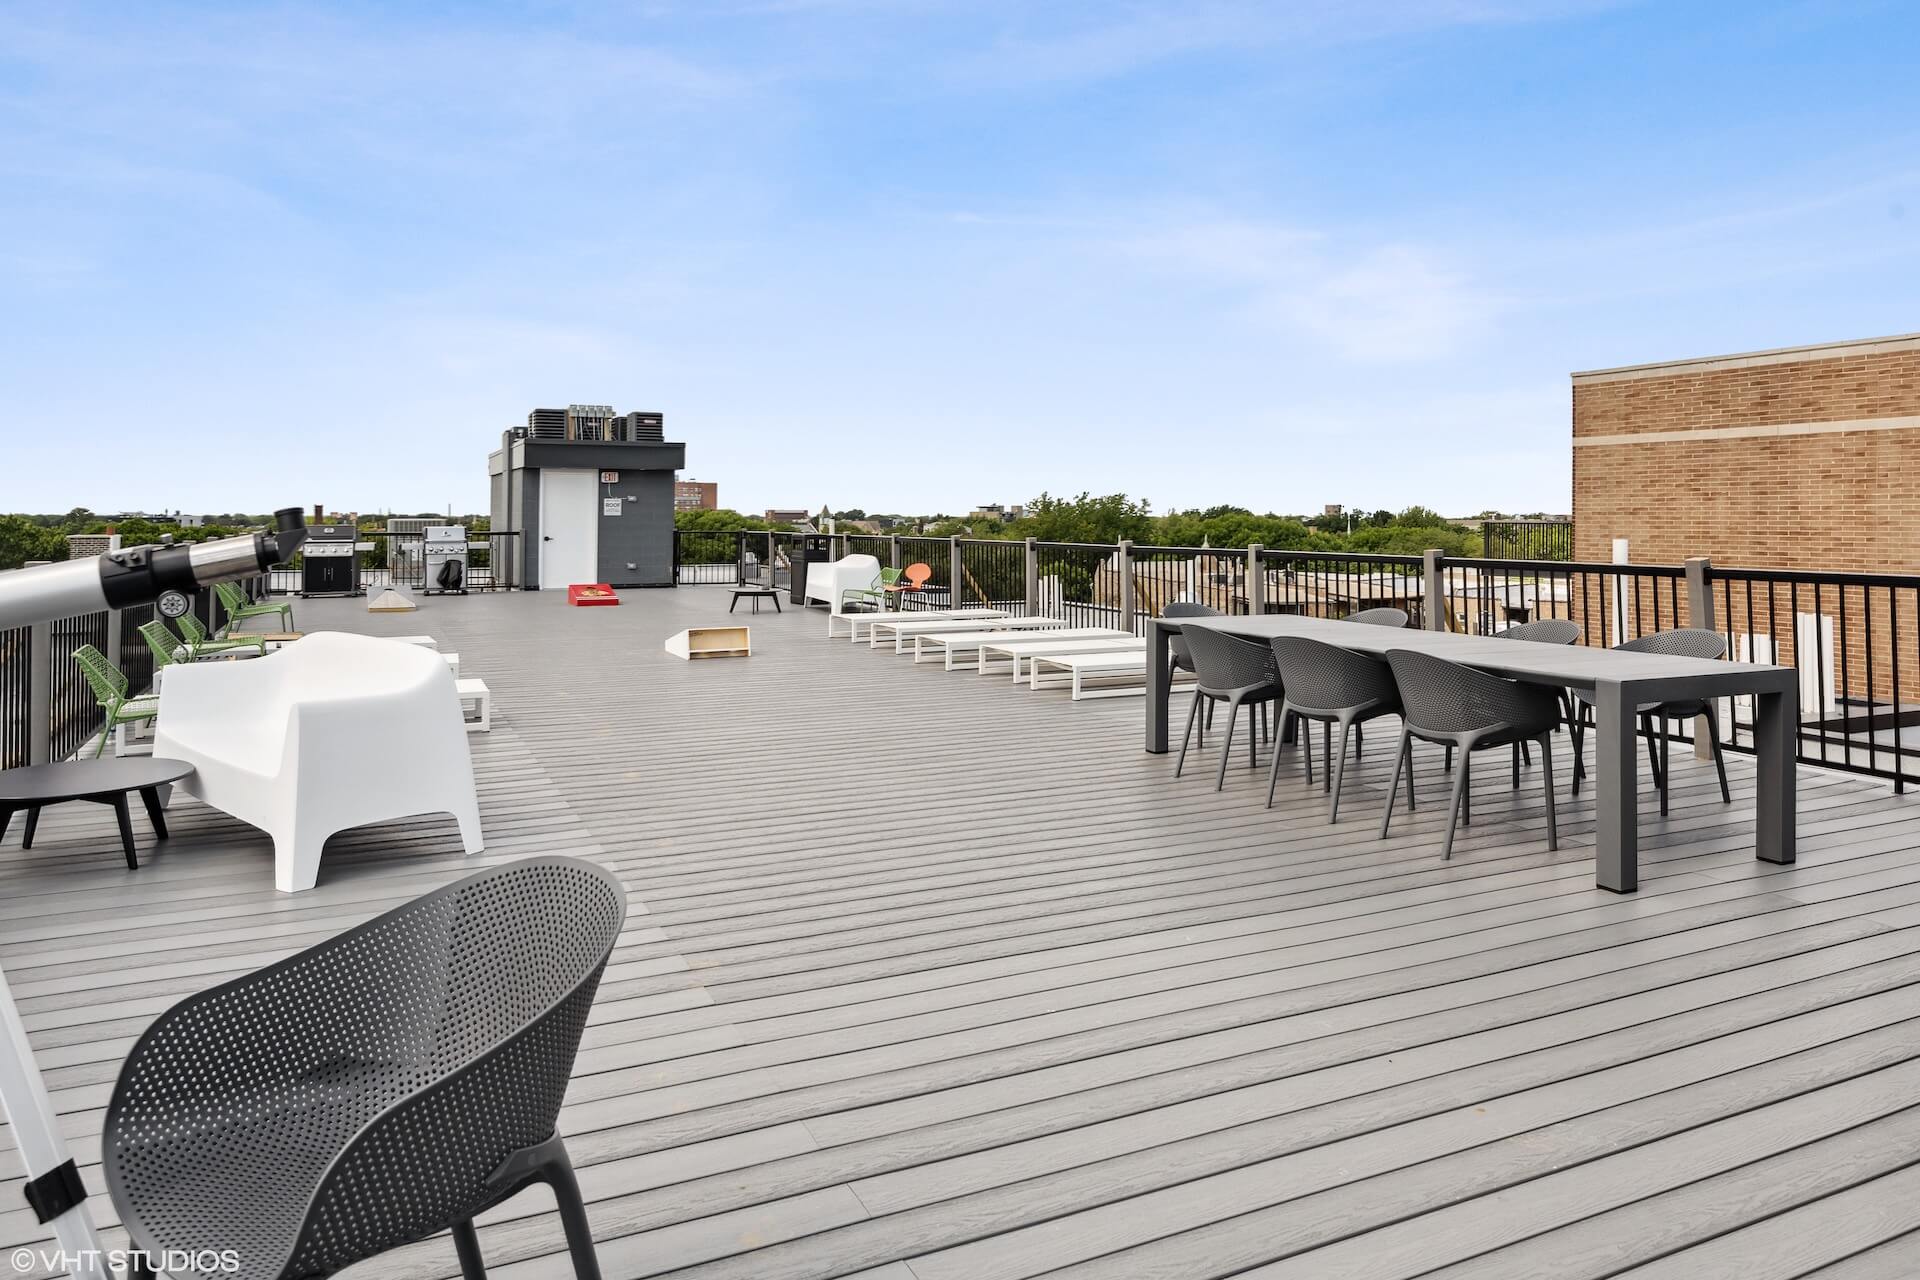 Private rooftop deck with grill station, lounge seating, a large table, telescopes, and corn hole games.